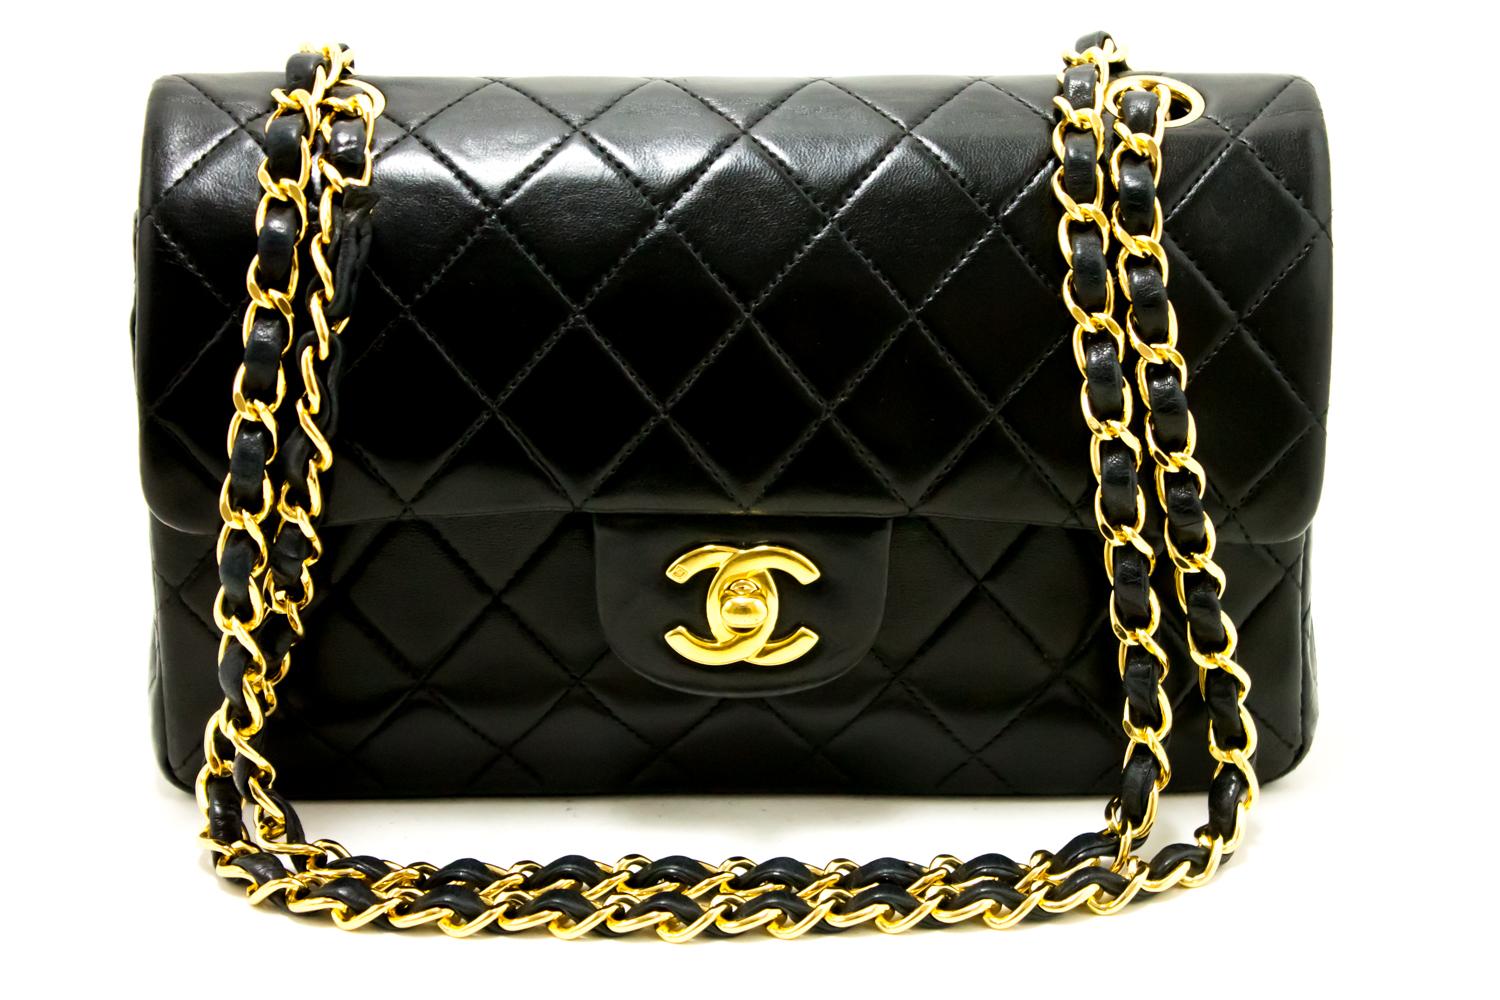 An authentic CHANEL 2.55 Classic Double Flap Small Chain Shoulder Bag Black Quilted. The color is Black. The outside material is Leather. The pattern is Solid.
Conditions & Ratings
Outside material: Lambskin
Color: Black
Closure: Turnlock
Hardware